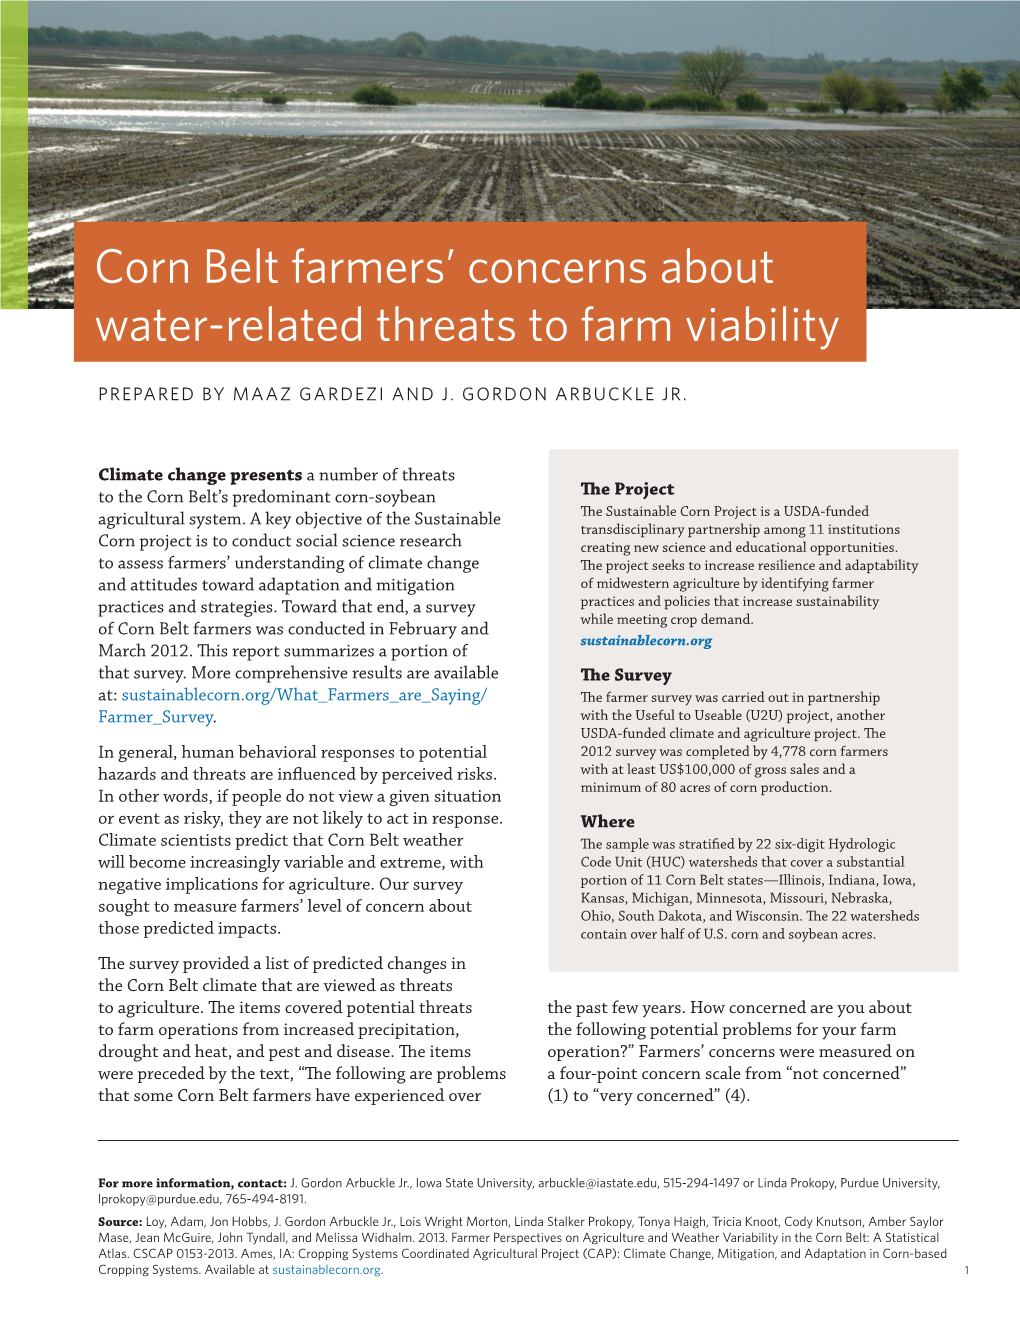 Corn Belt Farmers' Concerns About Water-Related Threats to Farm Viability